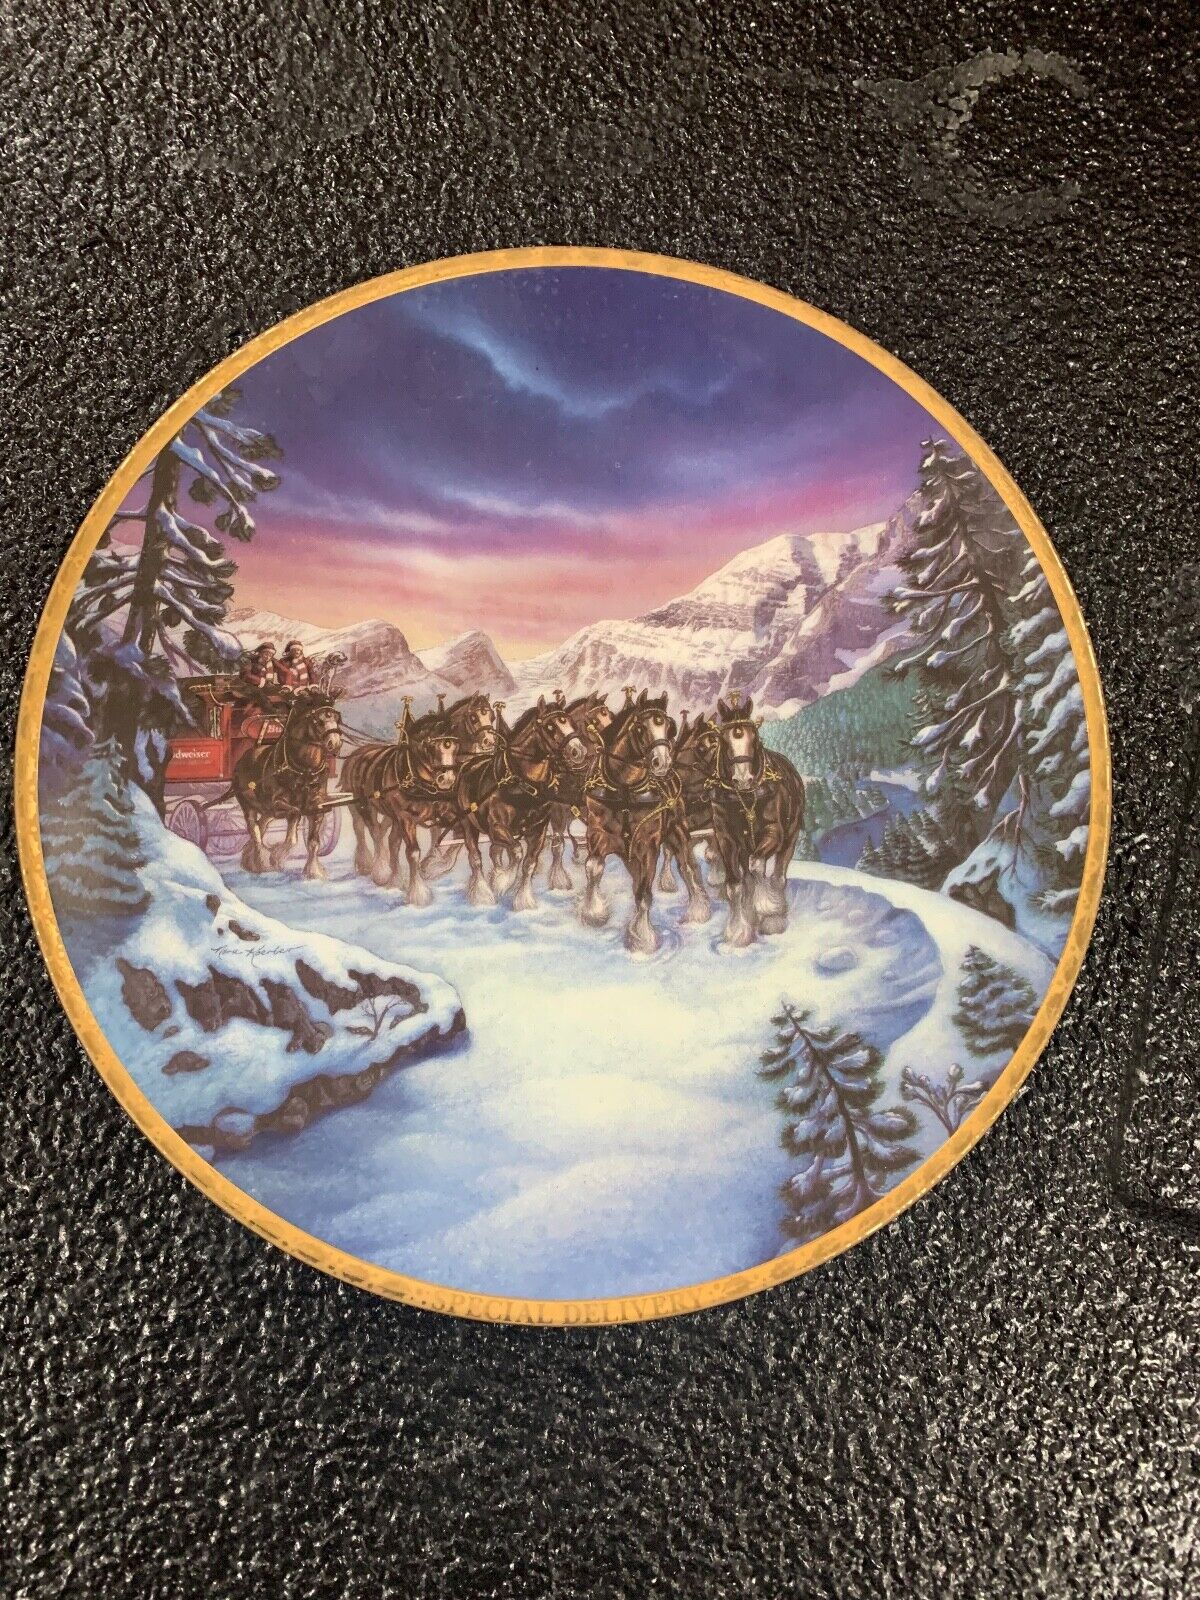 Budweiser Special Delivery World Famous Clydedales Plate Collection 1993